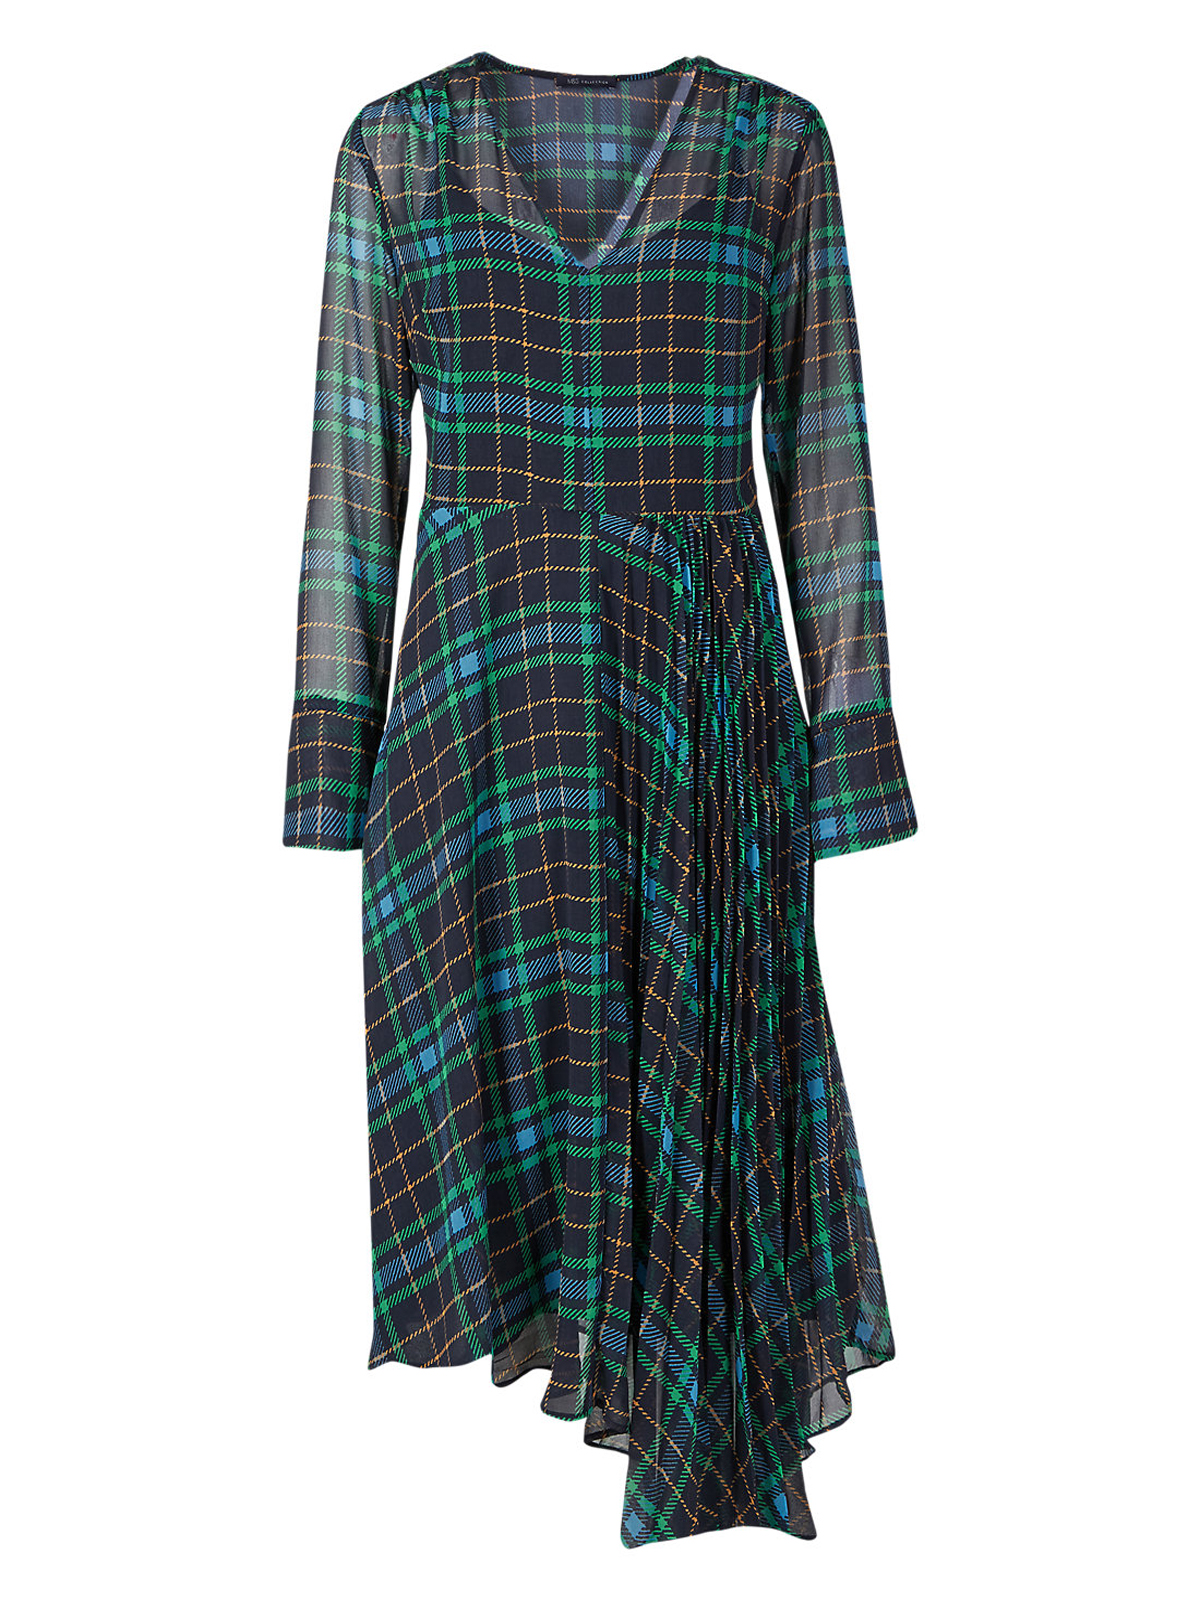 Marks and Spencer - - M&5 NAVY Checked Fit & Flare Midi Dress - Size 6 ...